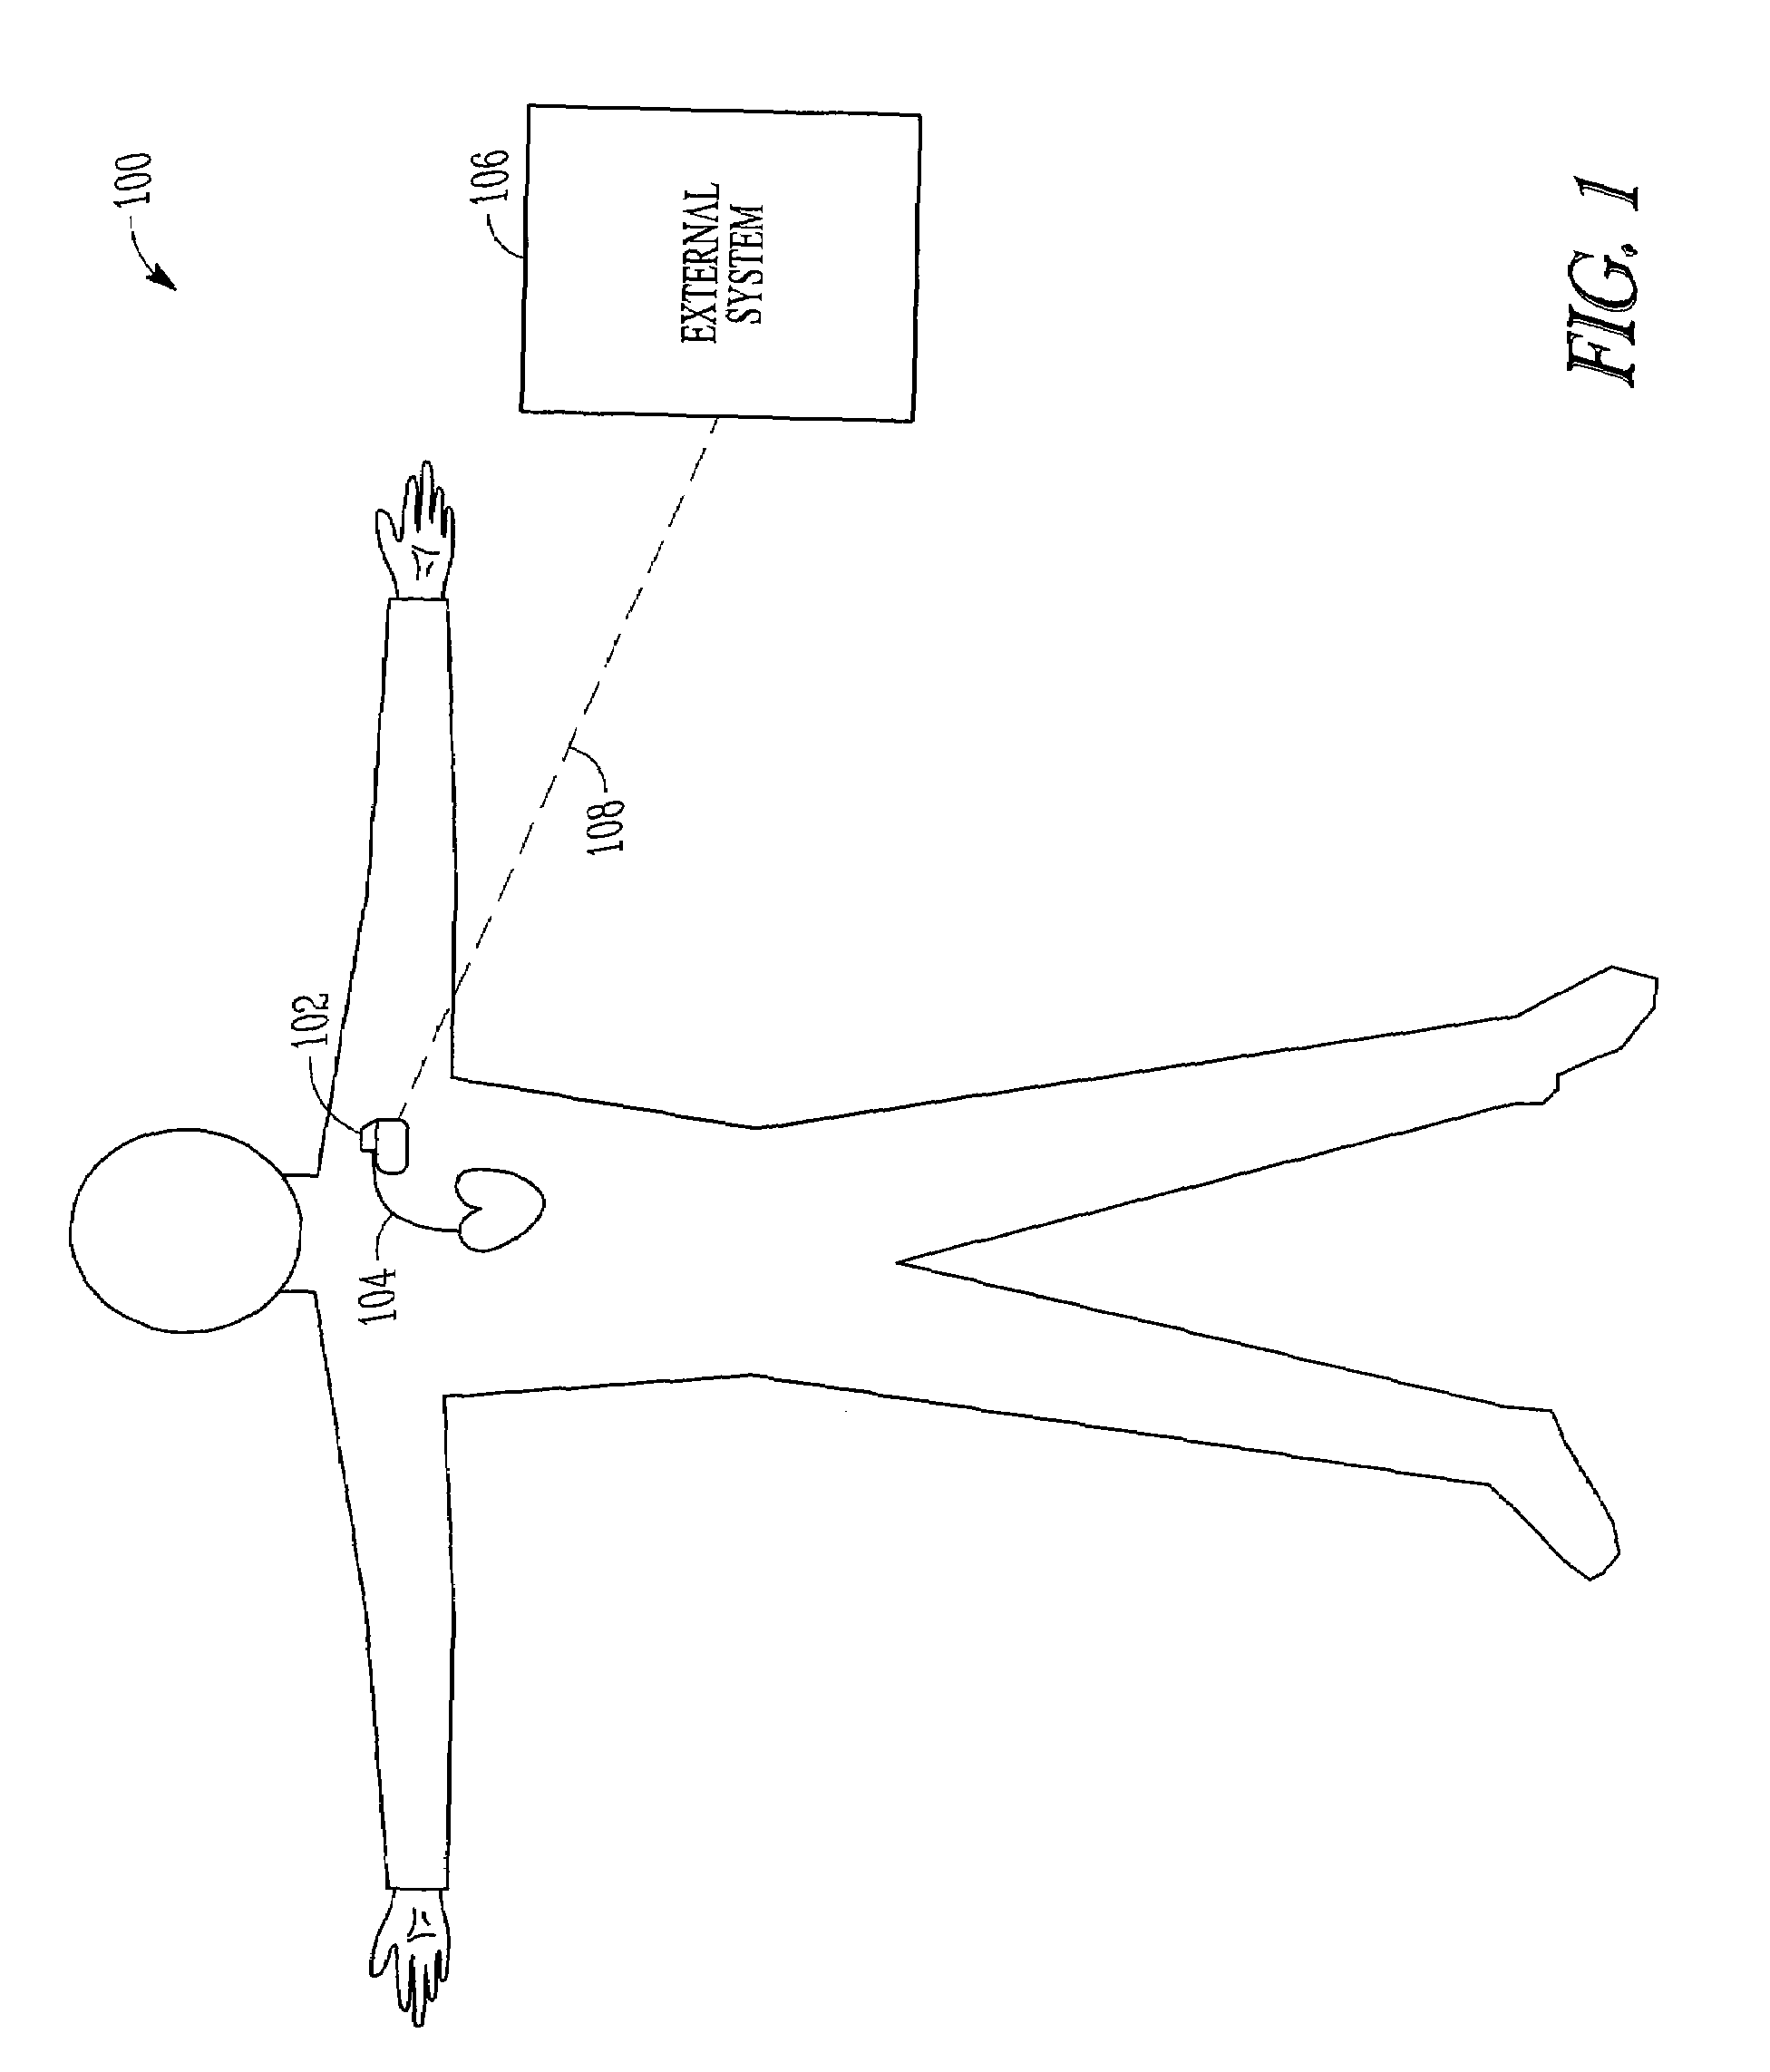 Physiological event detection systems and methods